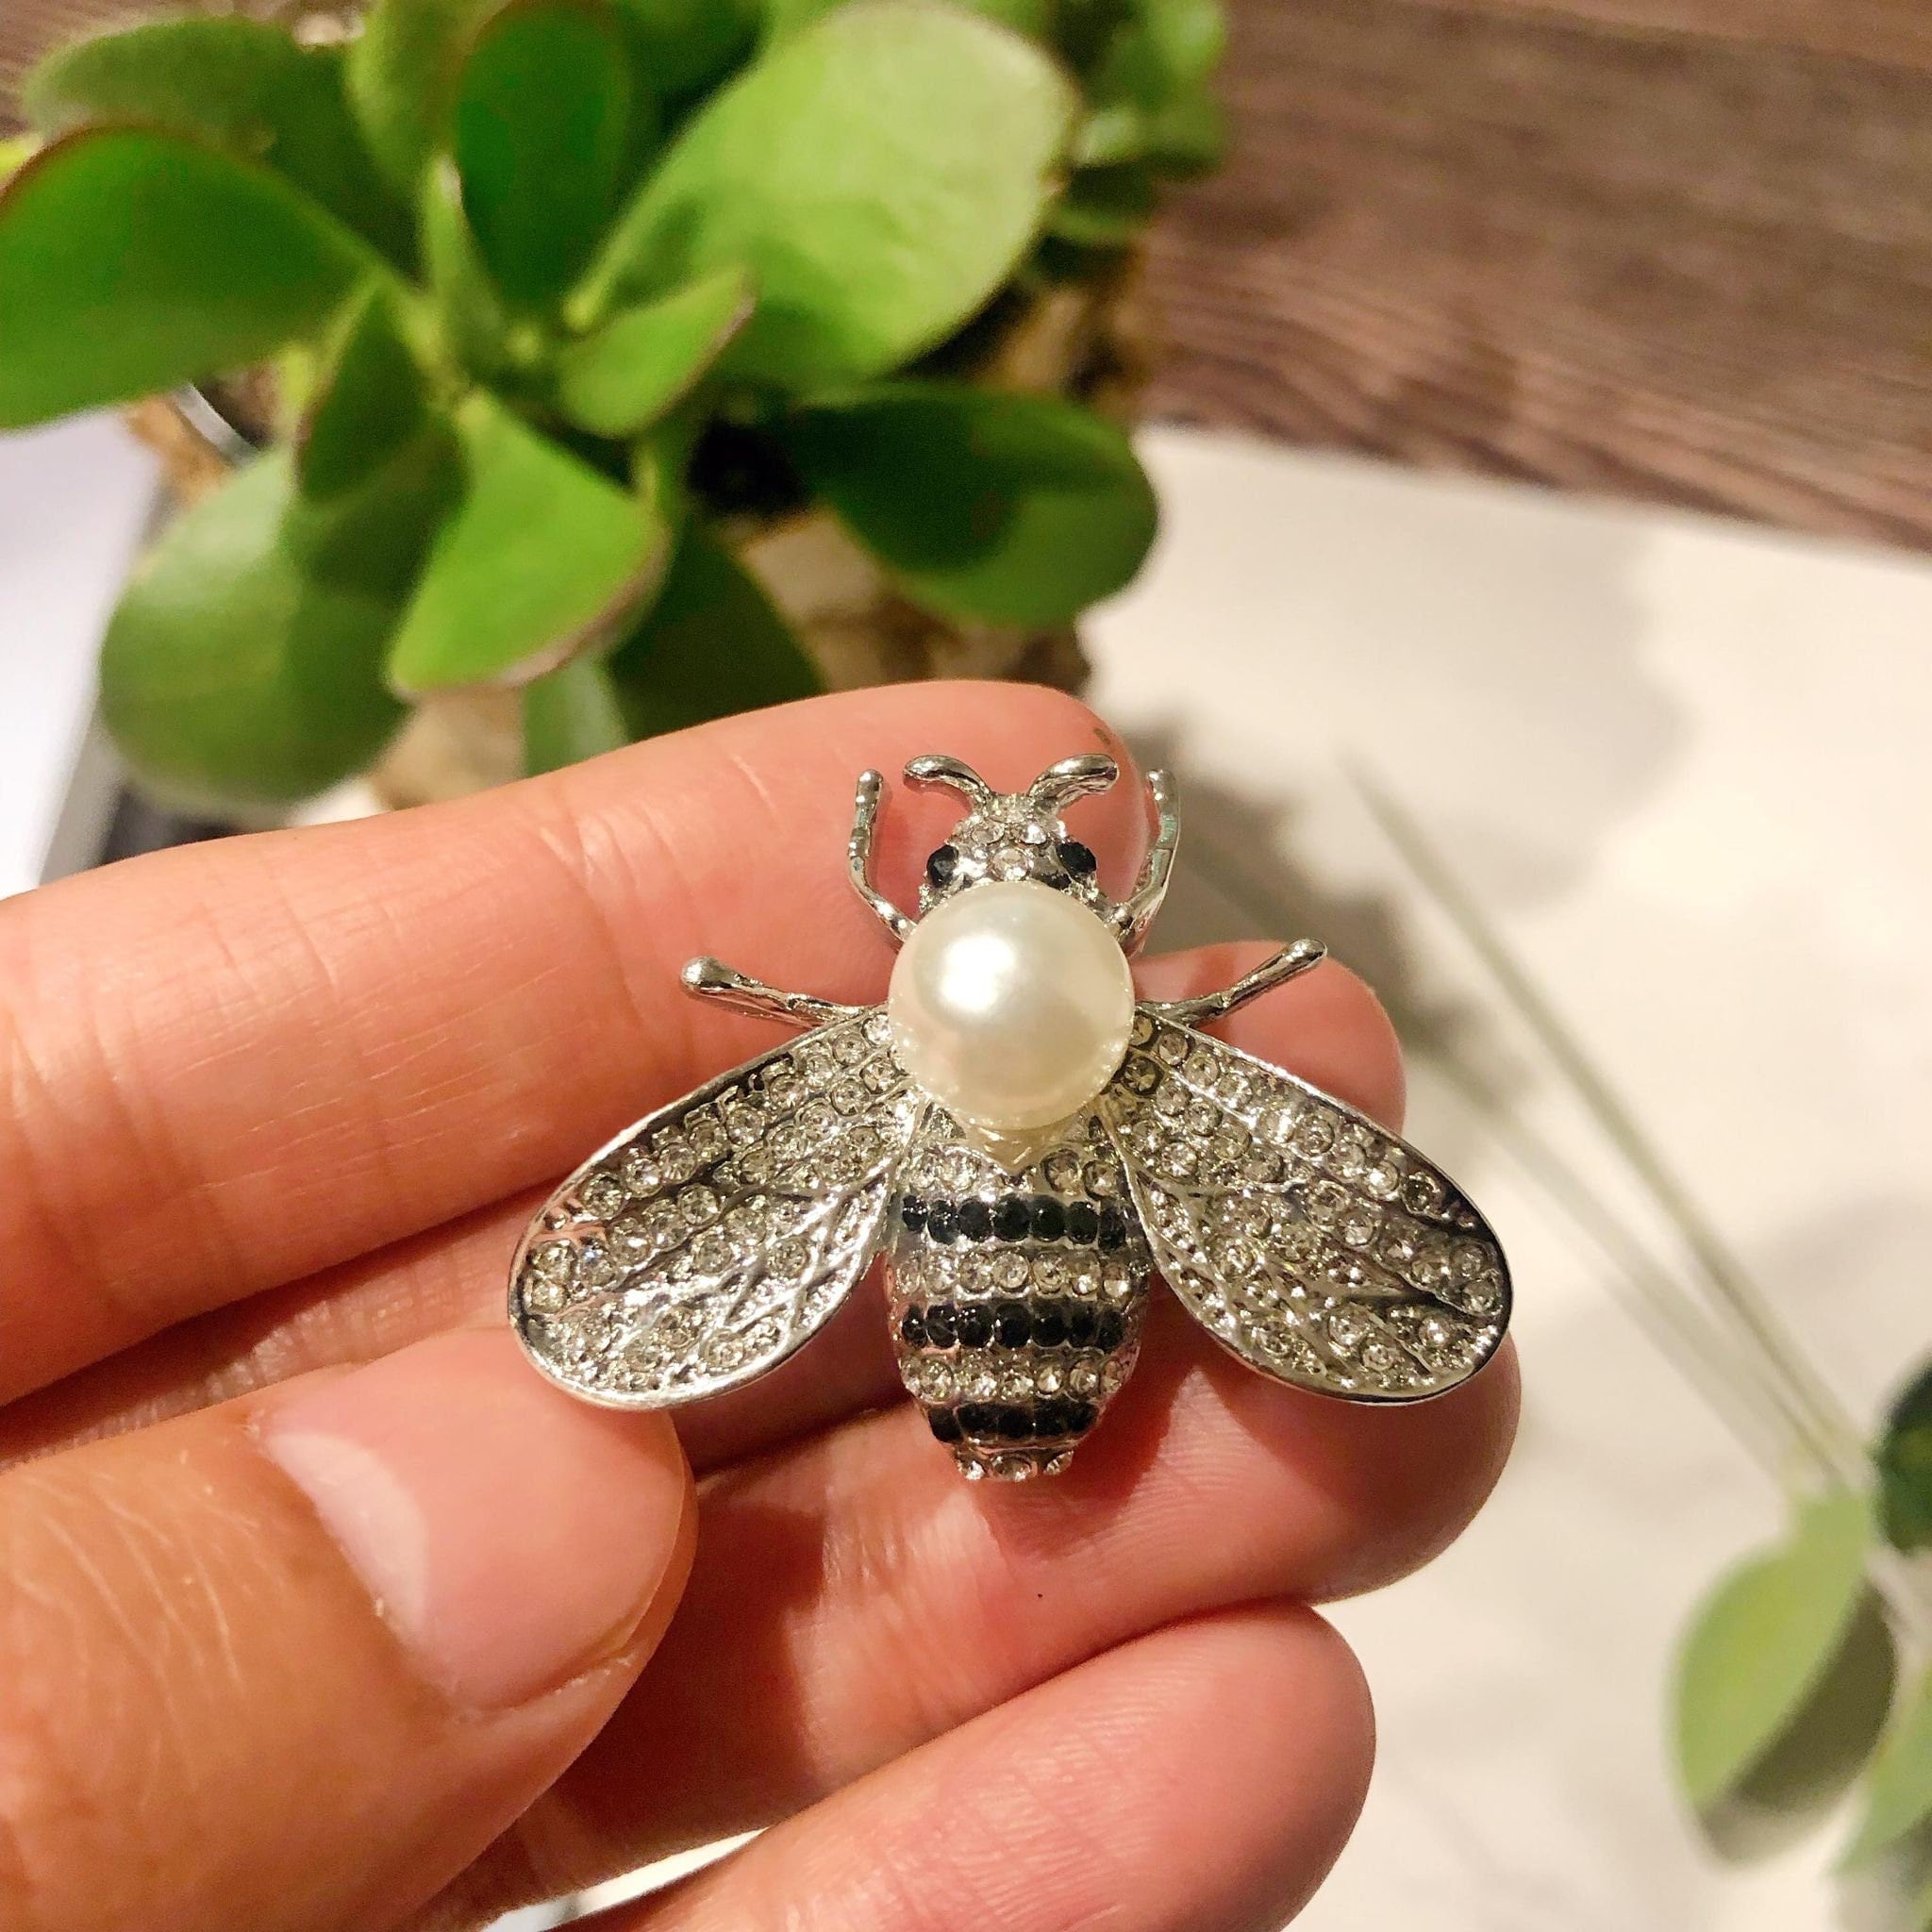 Cute Small Bee Sun Brooch For Women Pearl Heart Broche Pin Gift Rhinestones  Brooches Friend Party Anti-fade Buckle Brooch Jewelry Gift